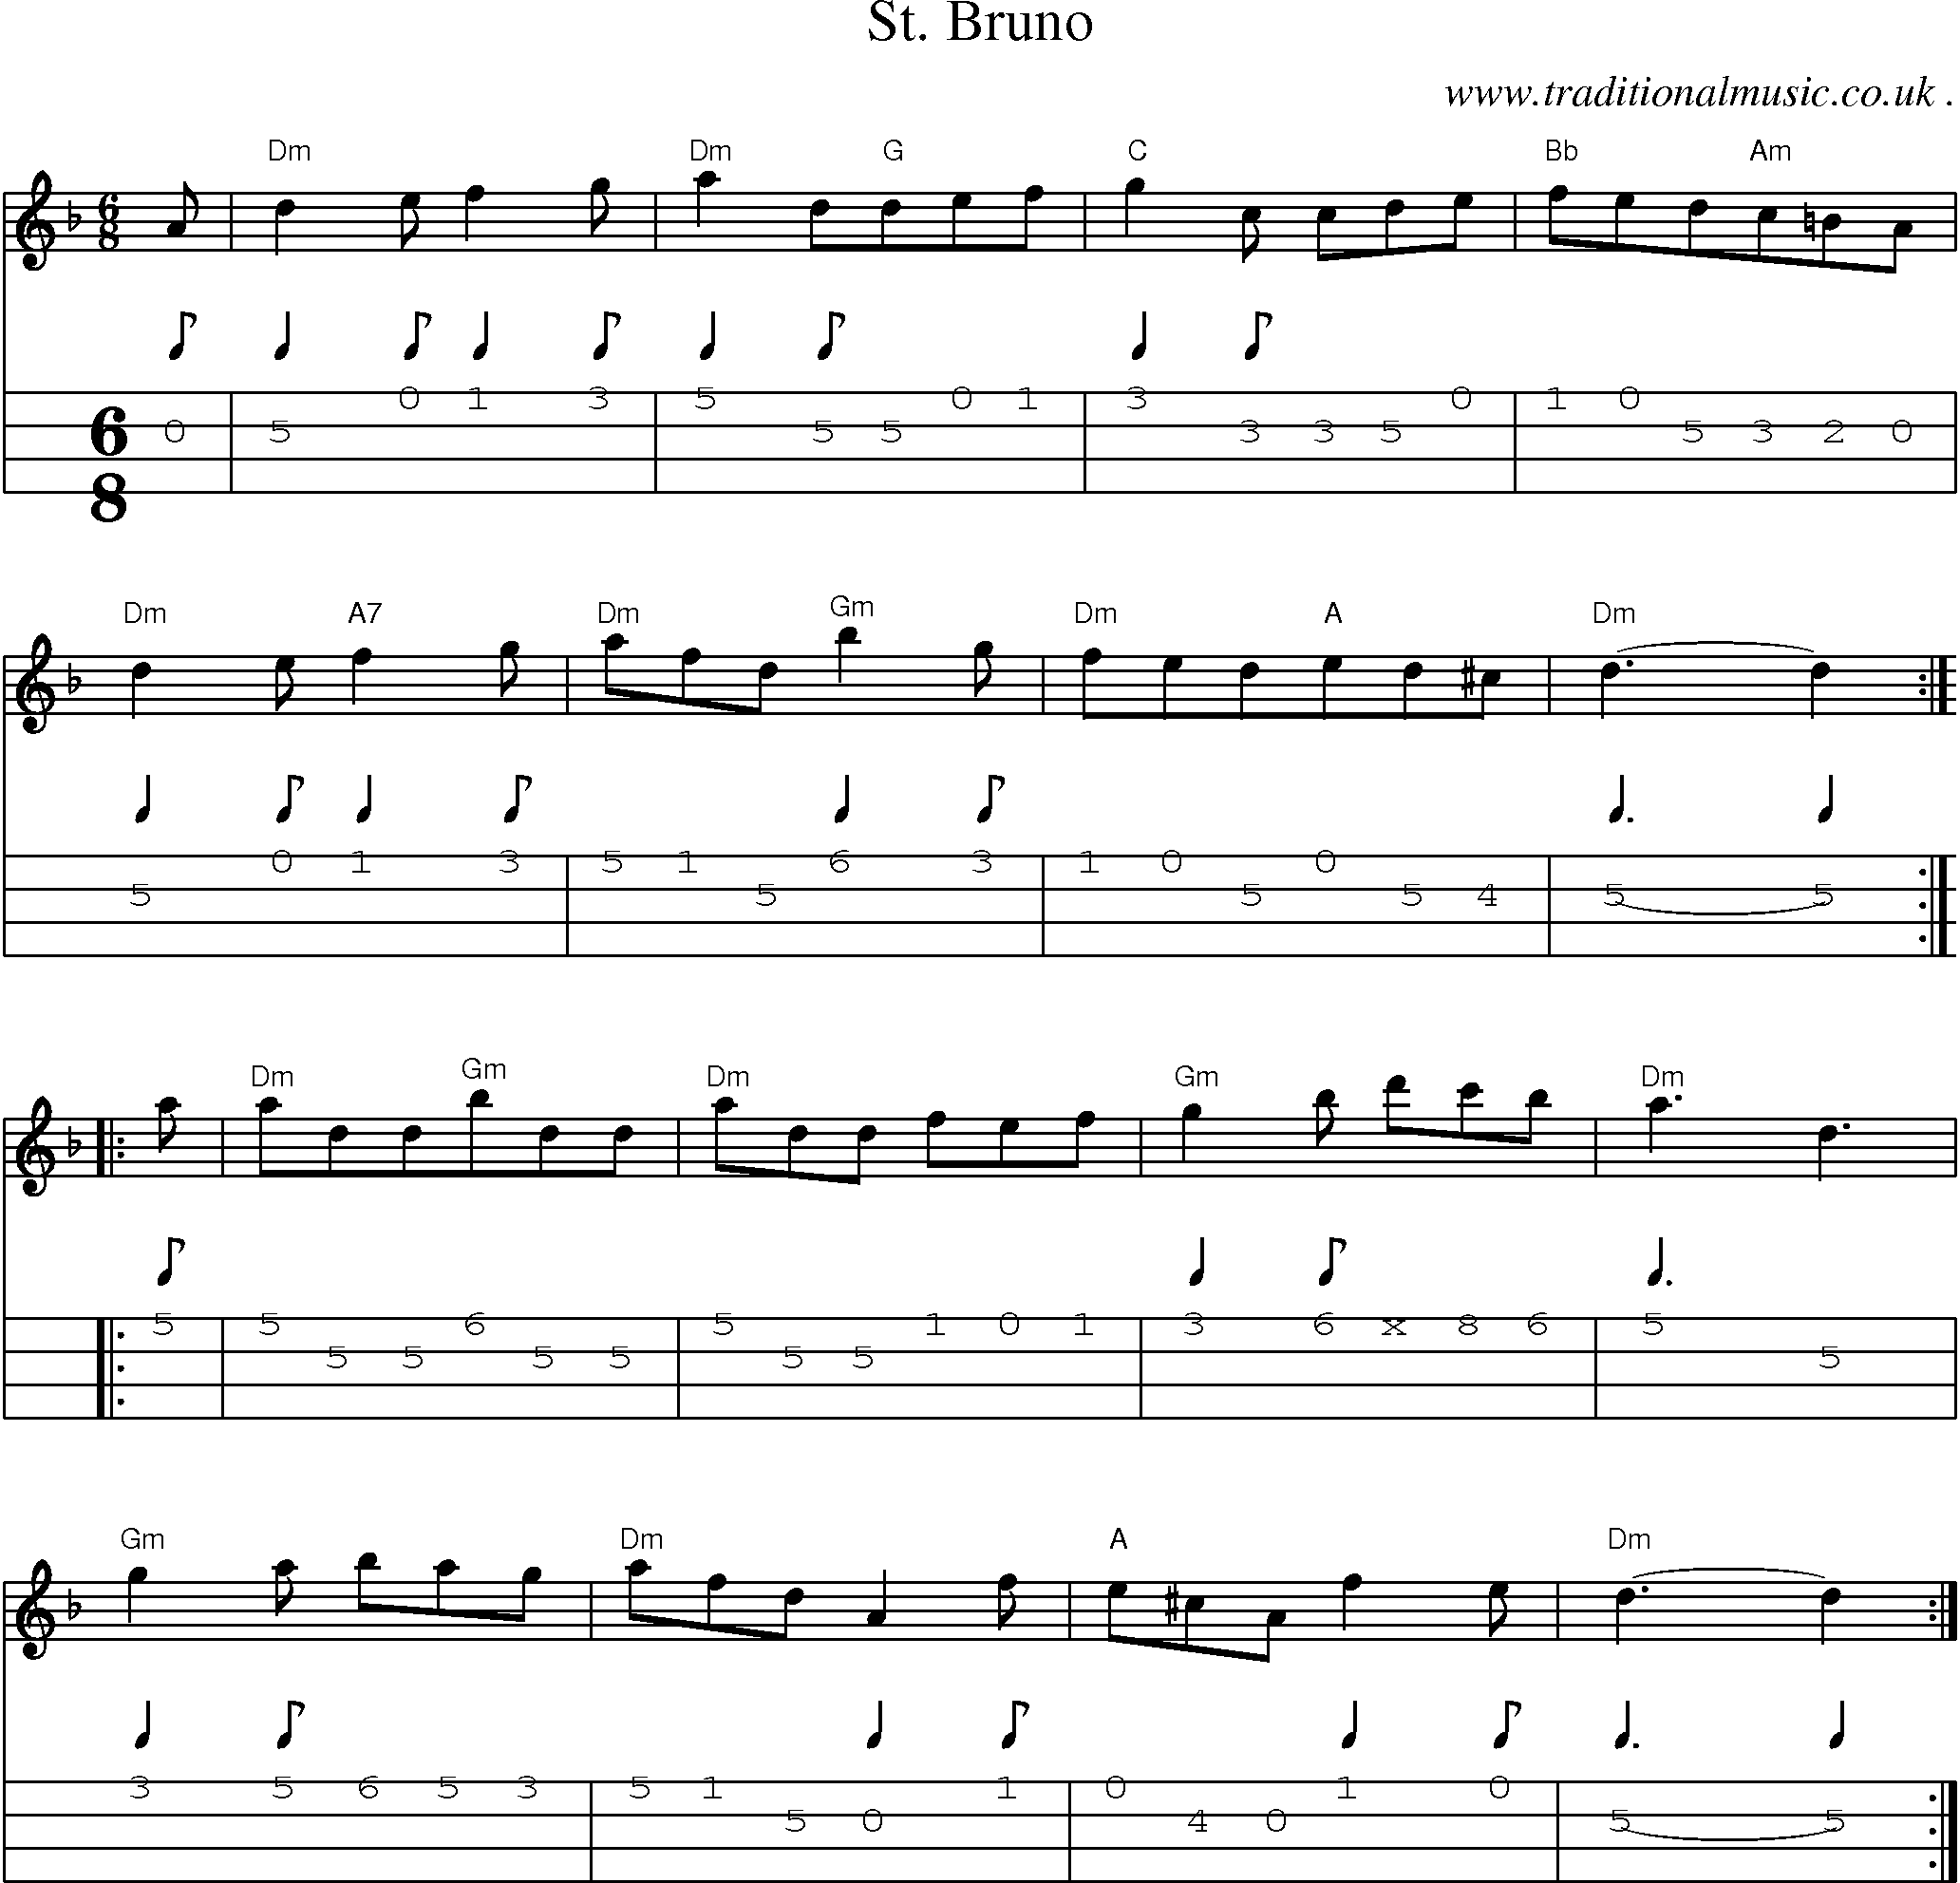 Sheet-Music and Mandolin Tabs for St Bruno